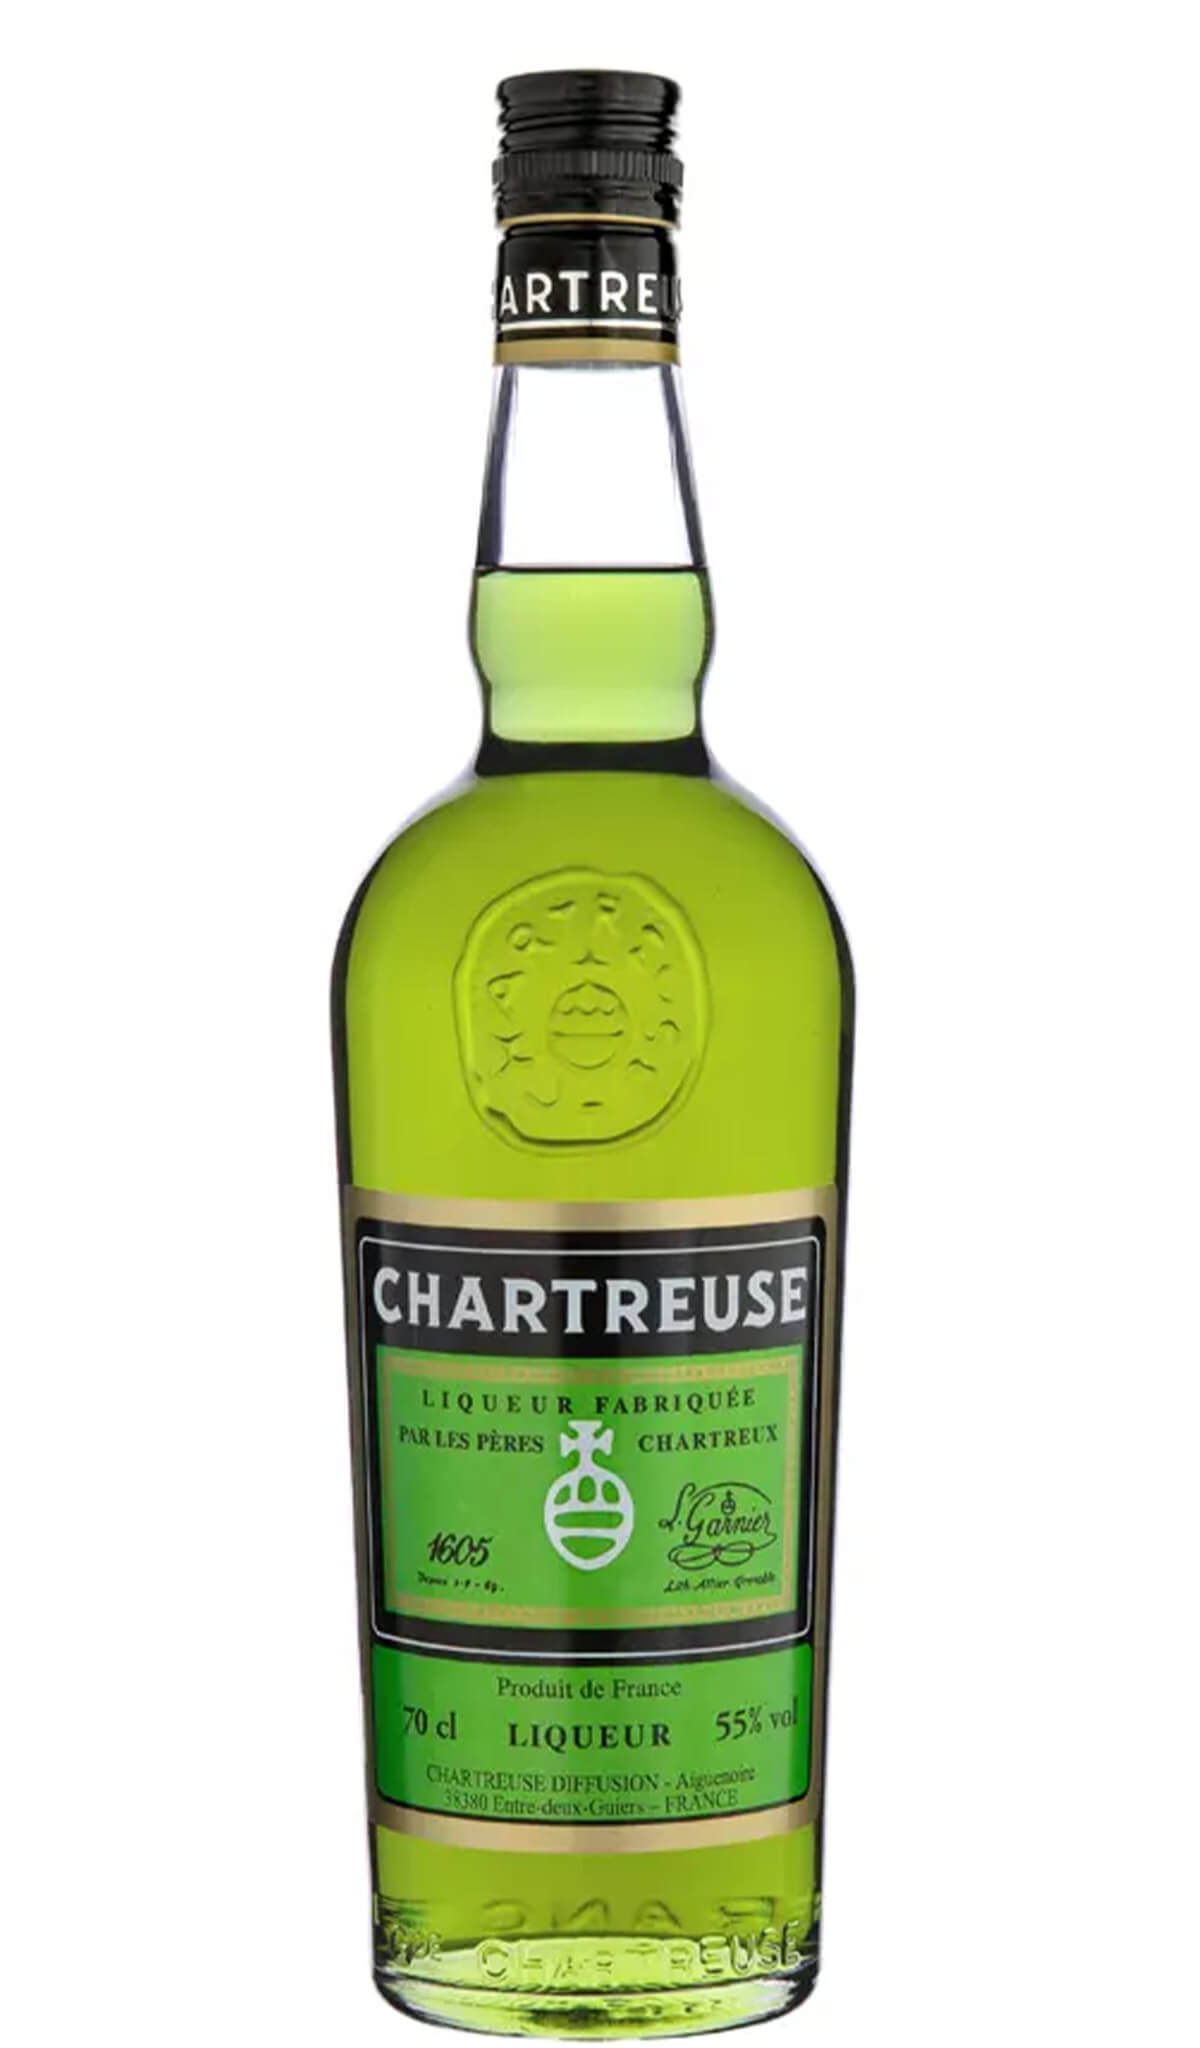 Find out more or buy Chartreuse Green 700ml (France) online at Wine Sellers Direct - Australia’s independent liquor specialists.